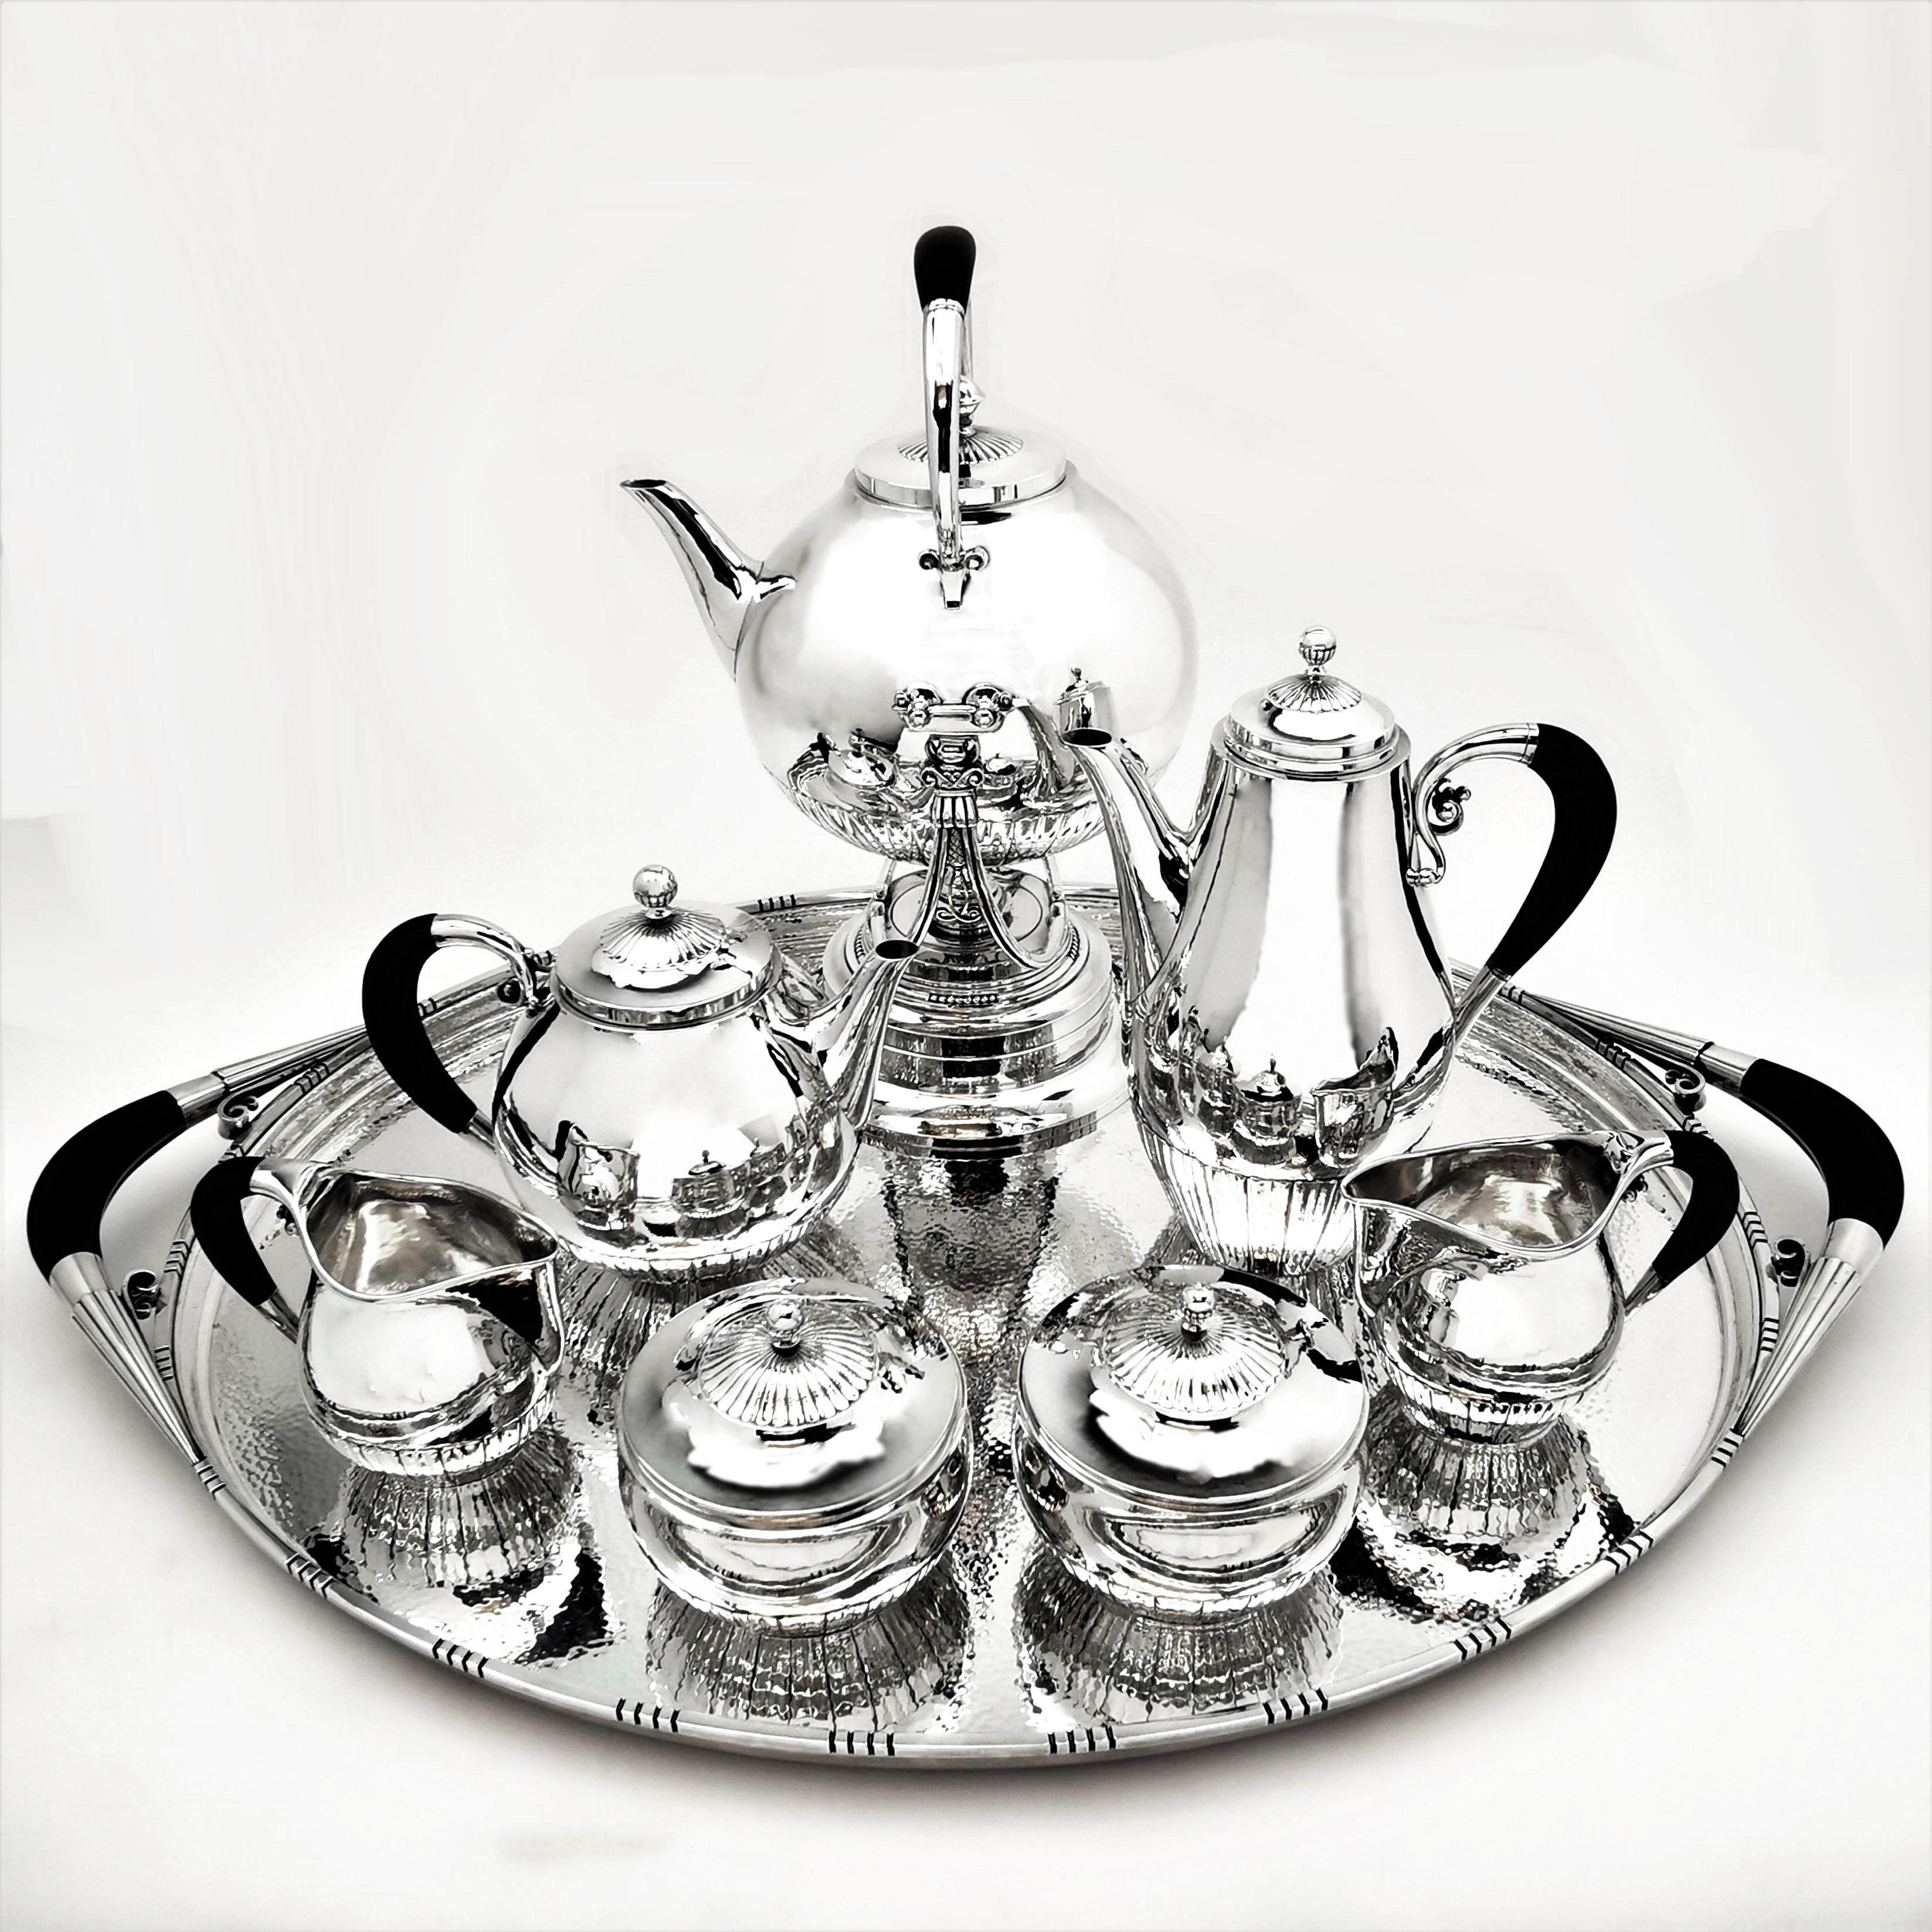 A magnificent Danish Georg Jensen 8 piece Tea and Coffee set in the Cosmos Pattern. The set comprises of a Kettle on Stand, Coffee Pot, Tea Pot, two Milk / Cream Jugs and two lidded Sugar Bowls on large Tea Tray.
The handles of the set are a shaped